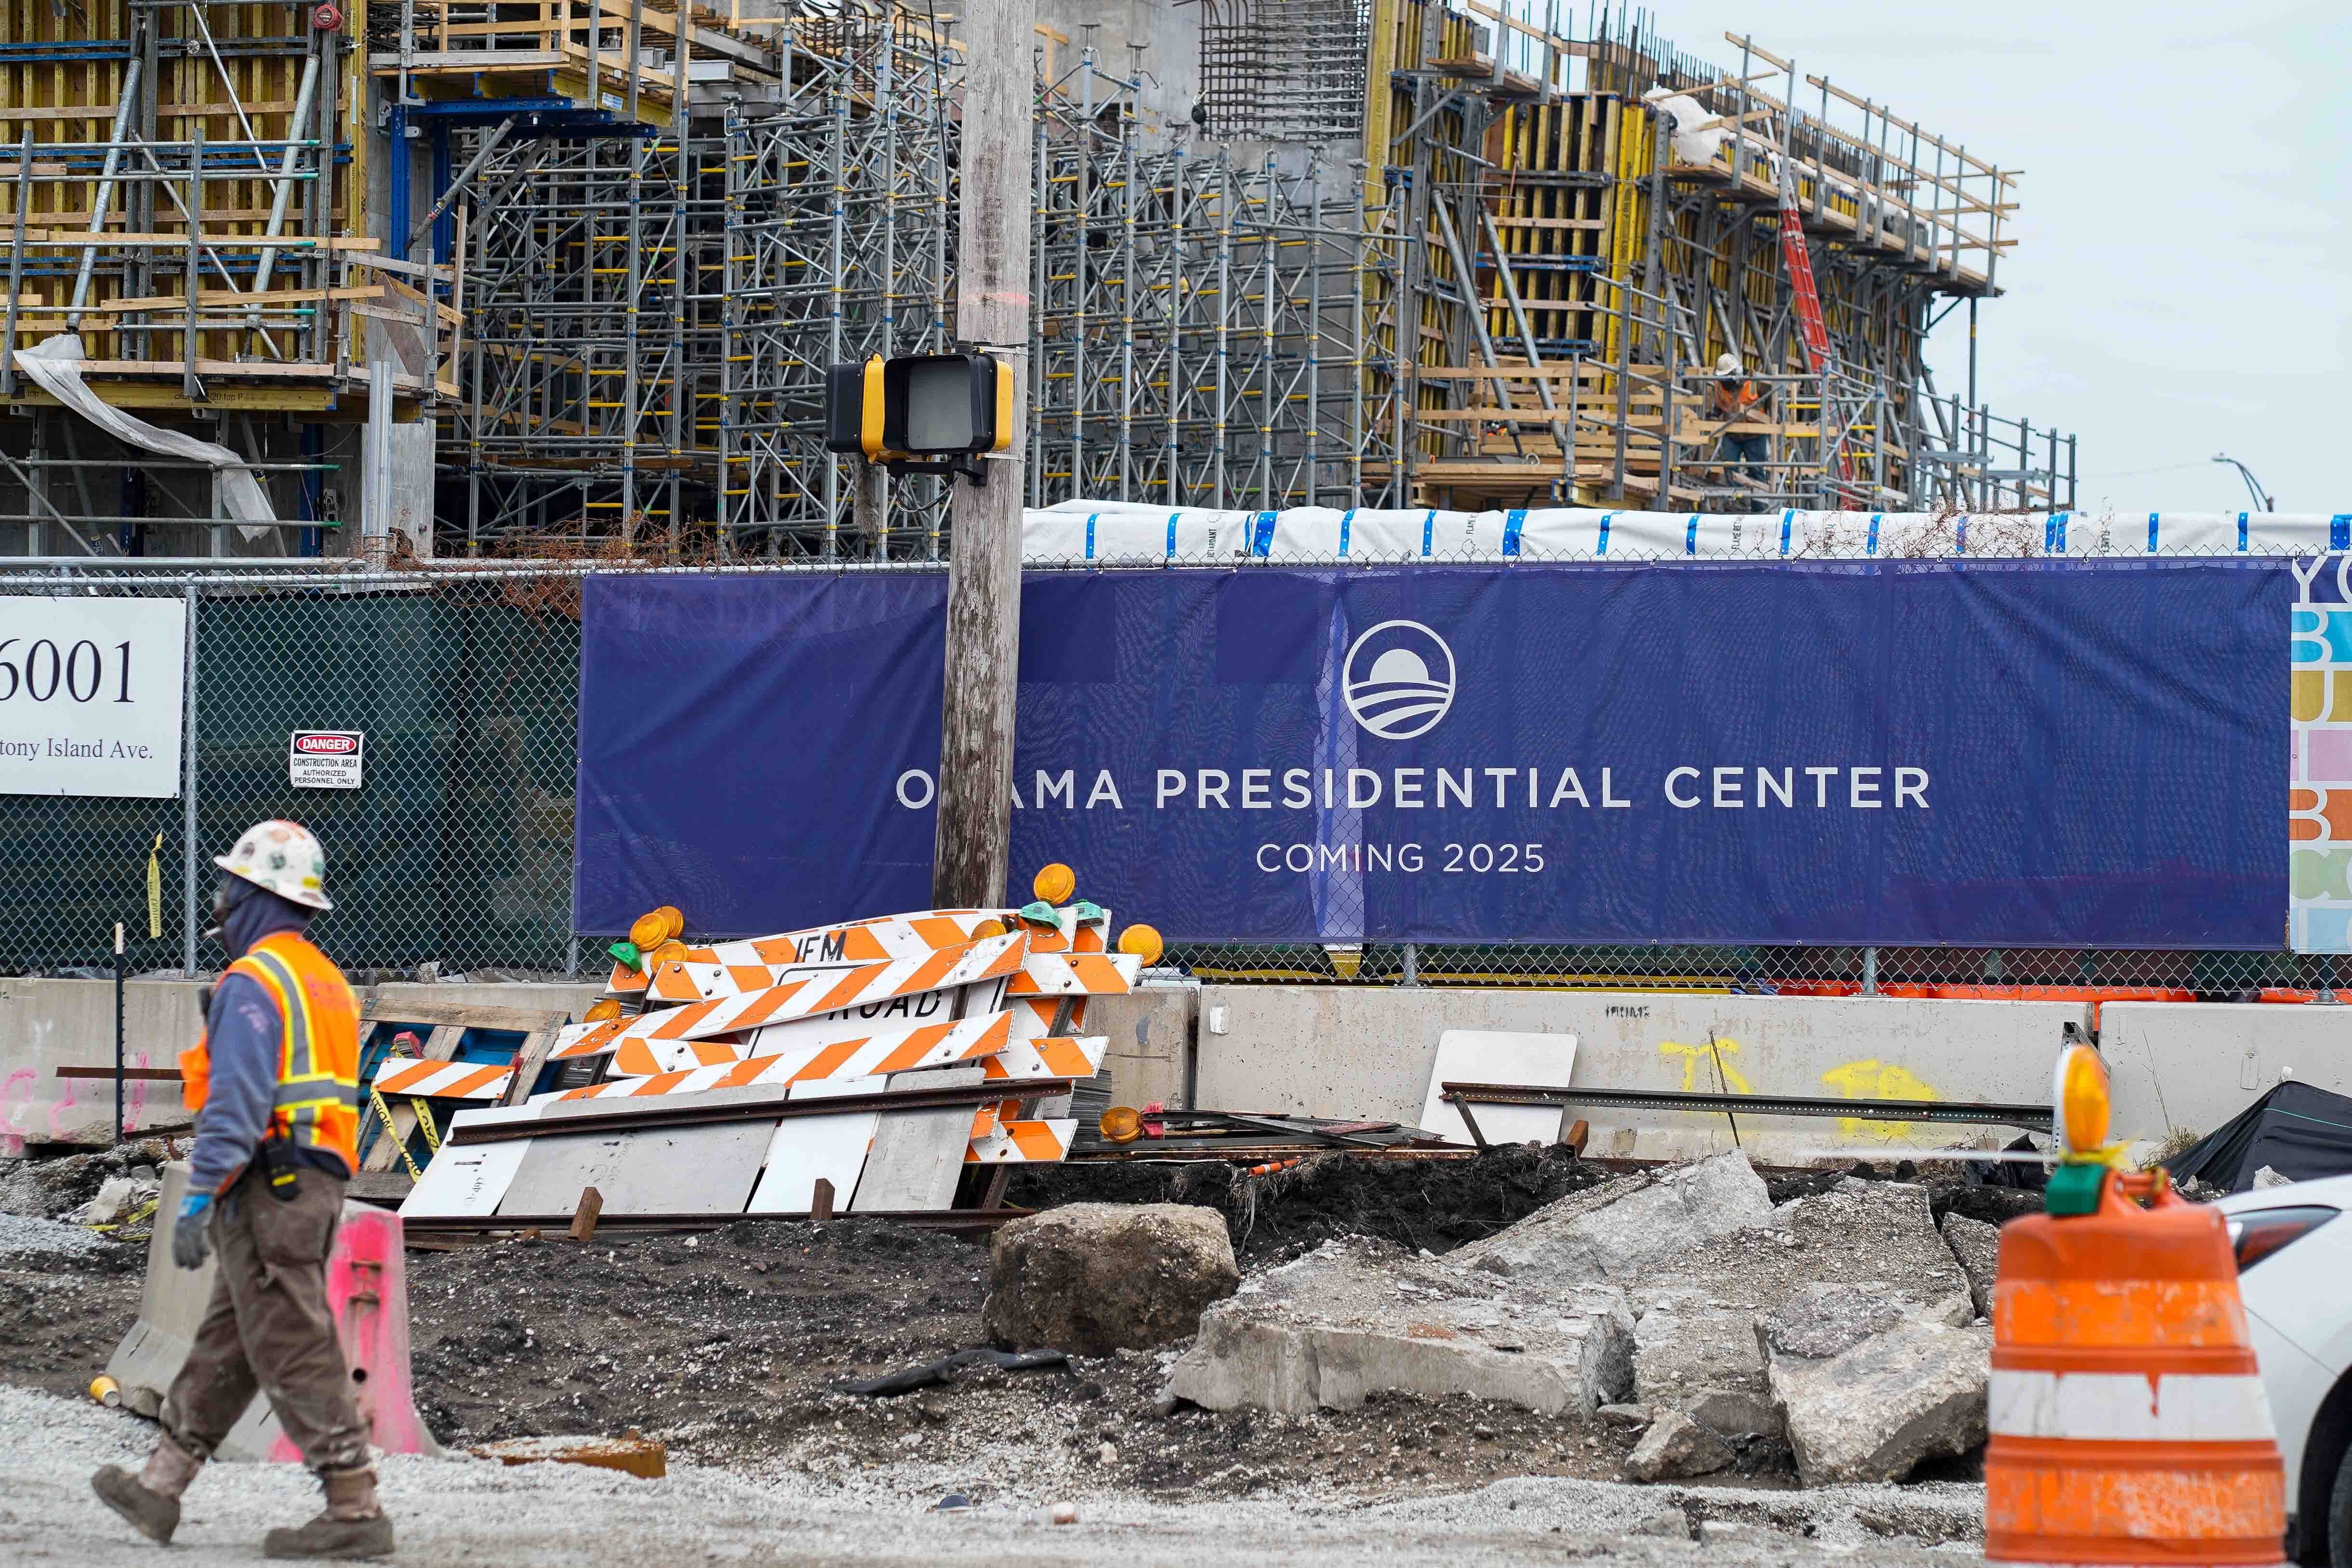 Worker in construction clothes in front of blue sign at construction site saying "Obama Presidential Center."